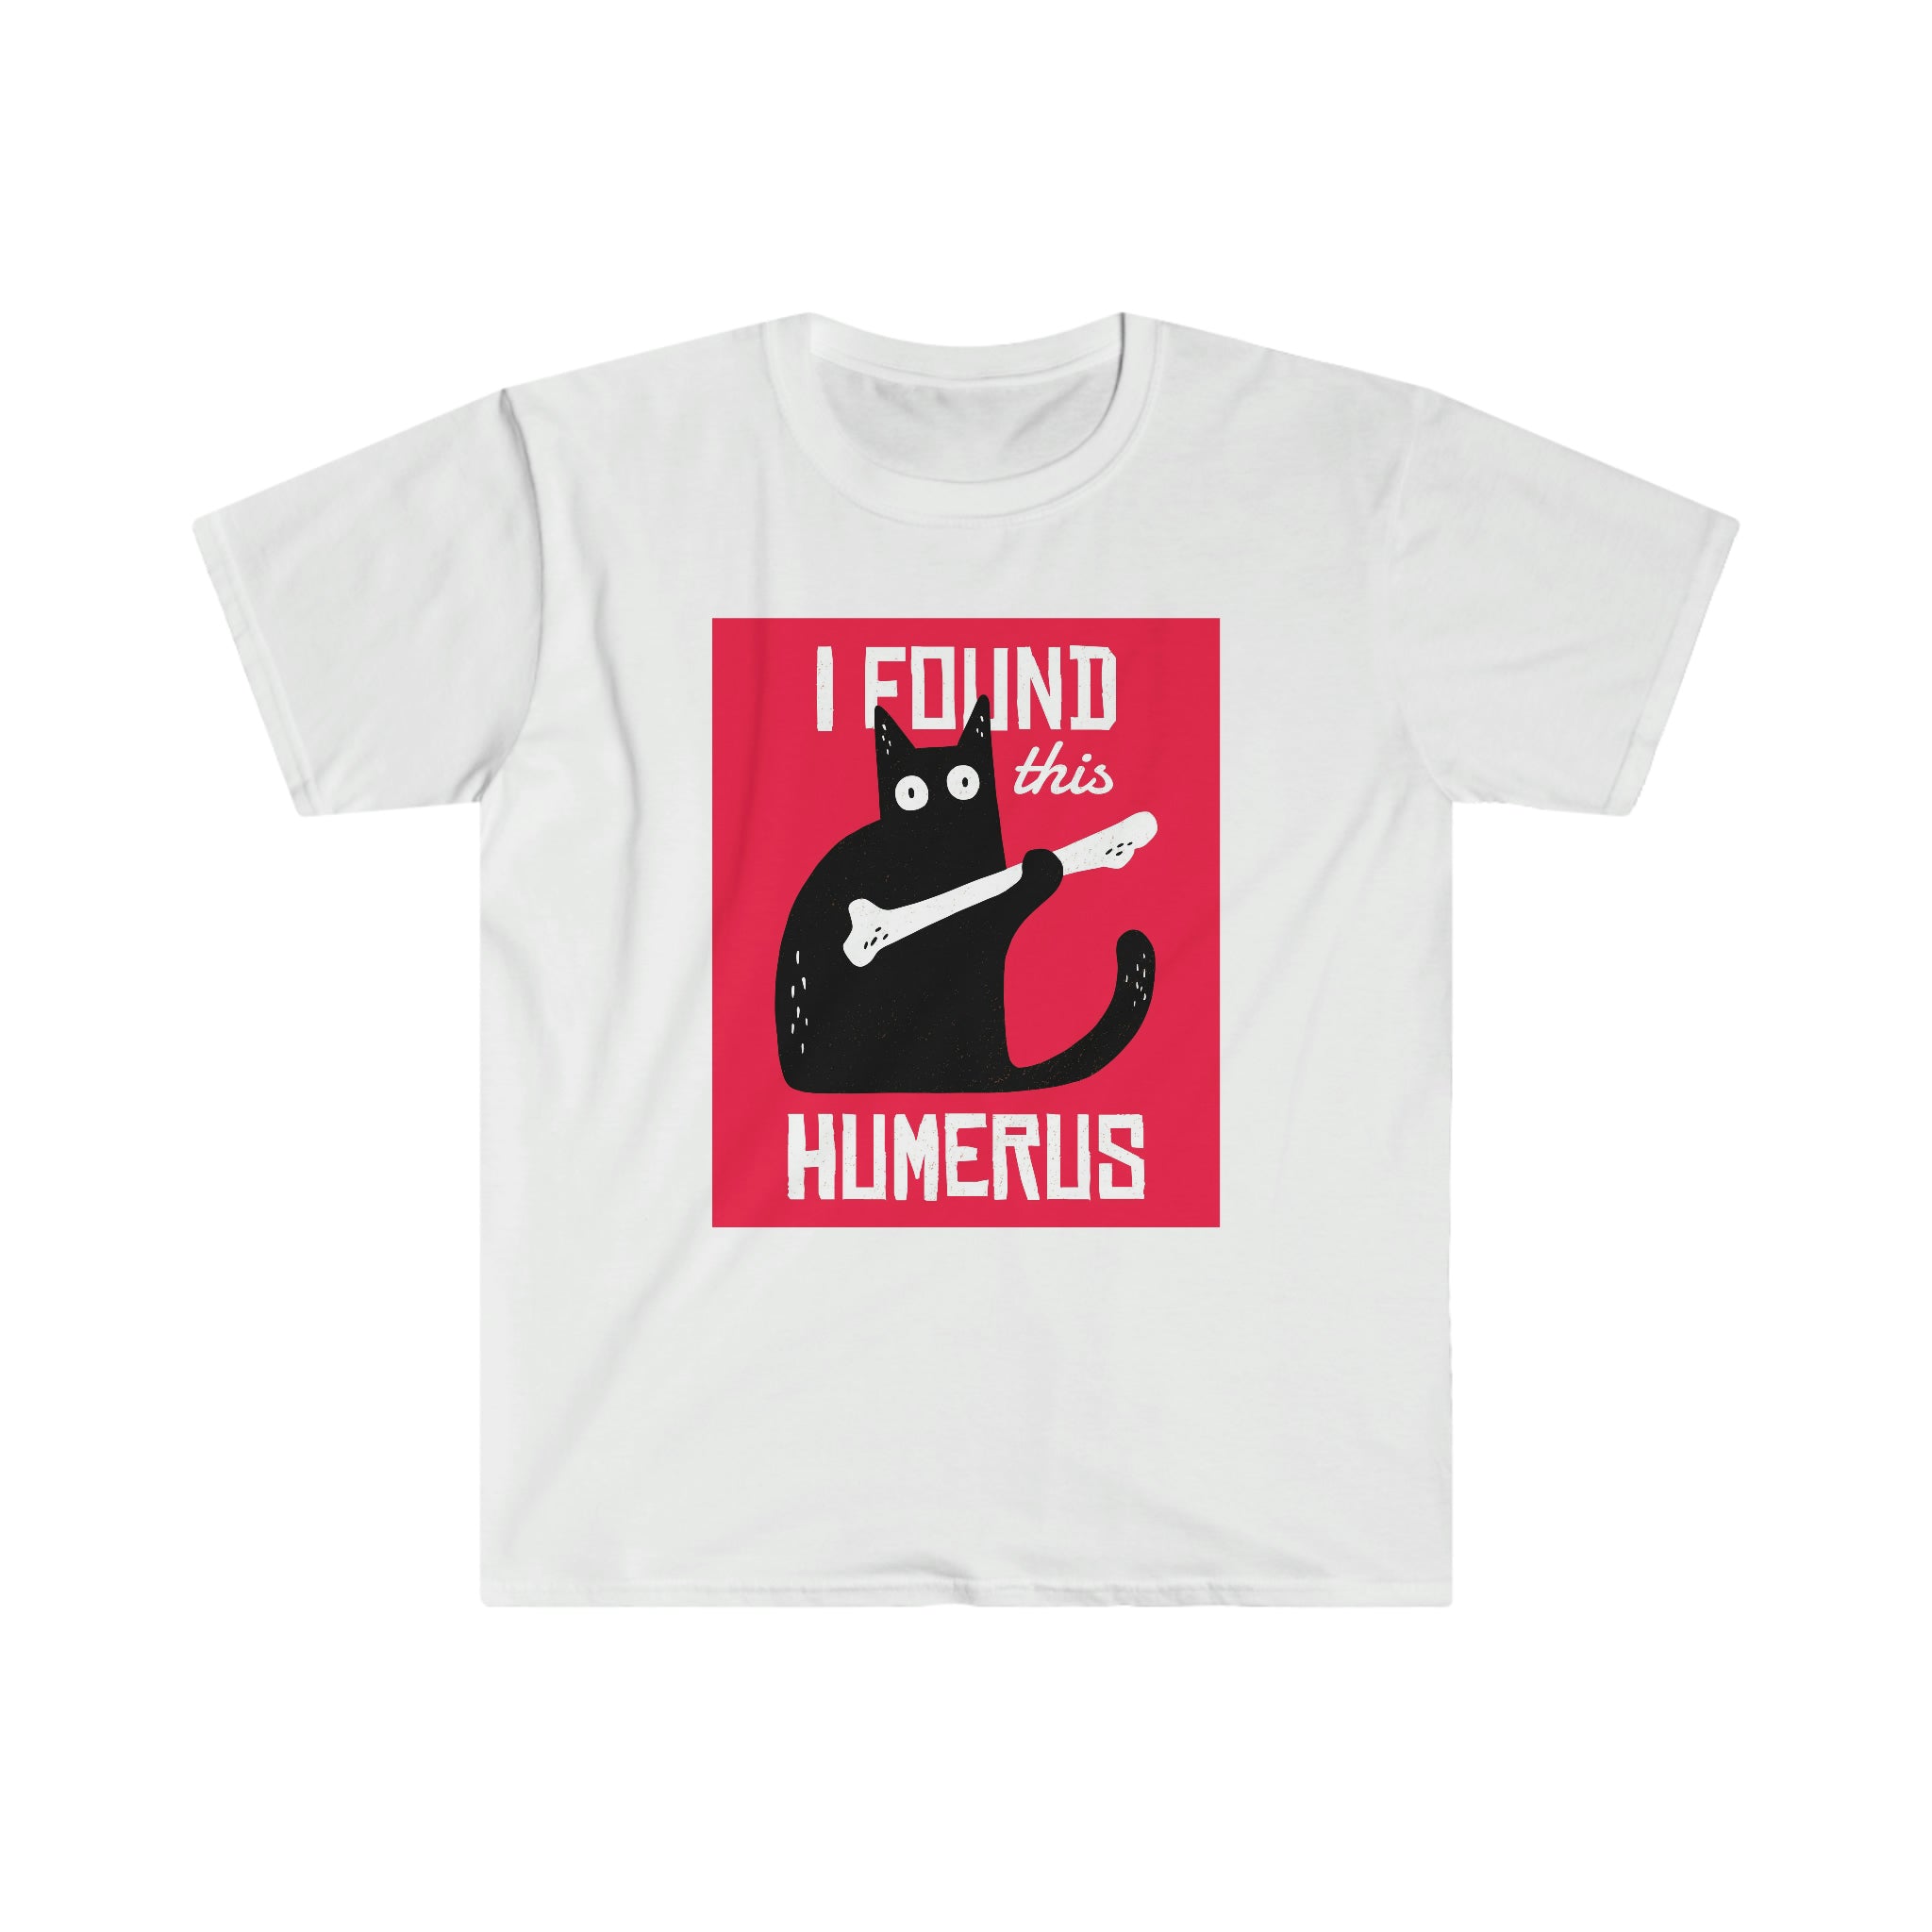 A hilarious "I Found This Humerus T-Shirt" that says i found a hungry.